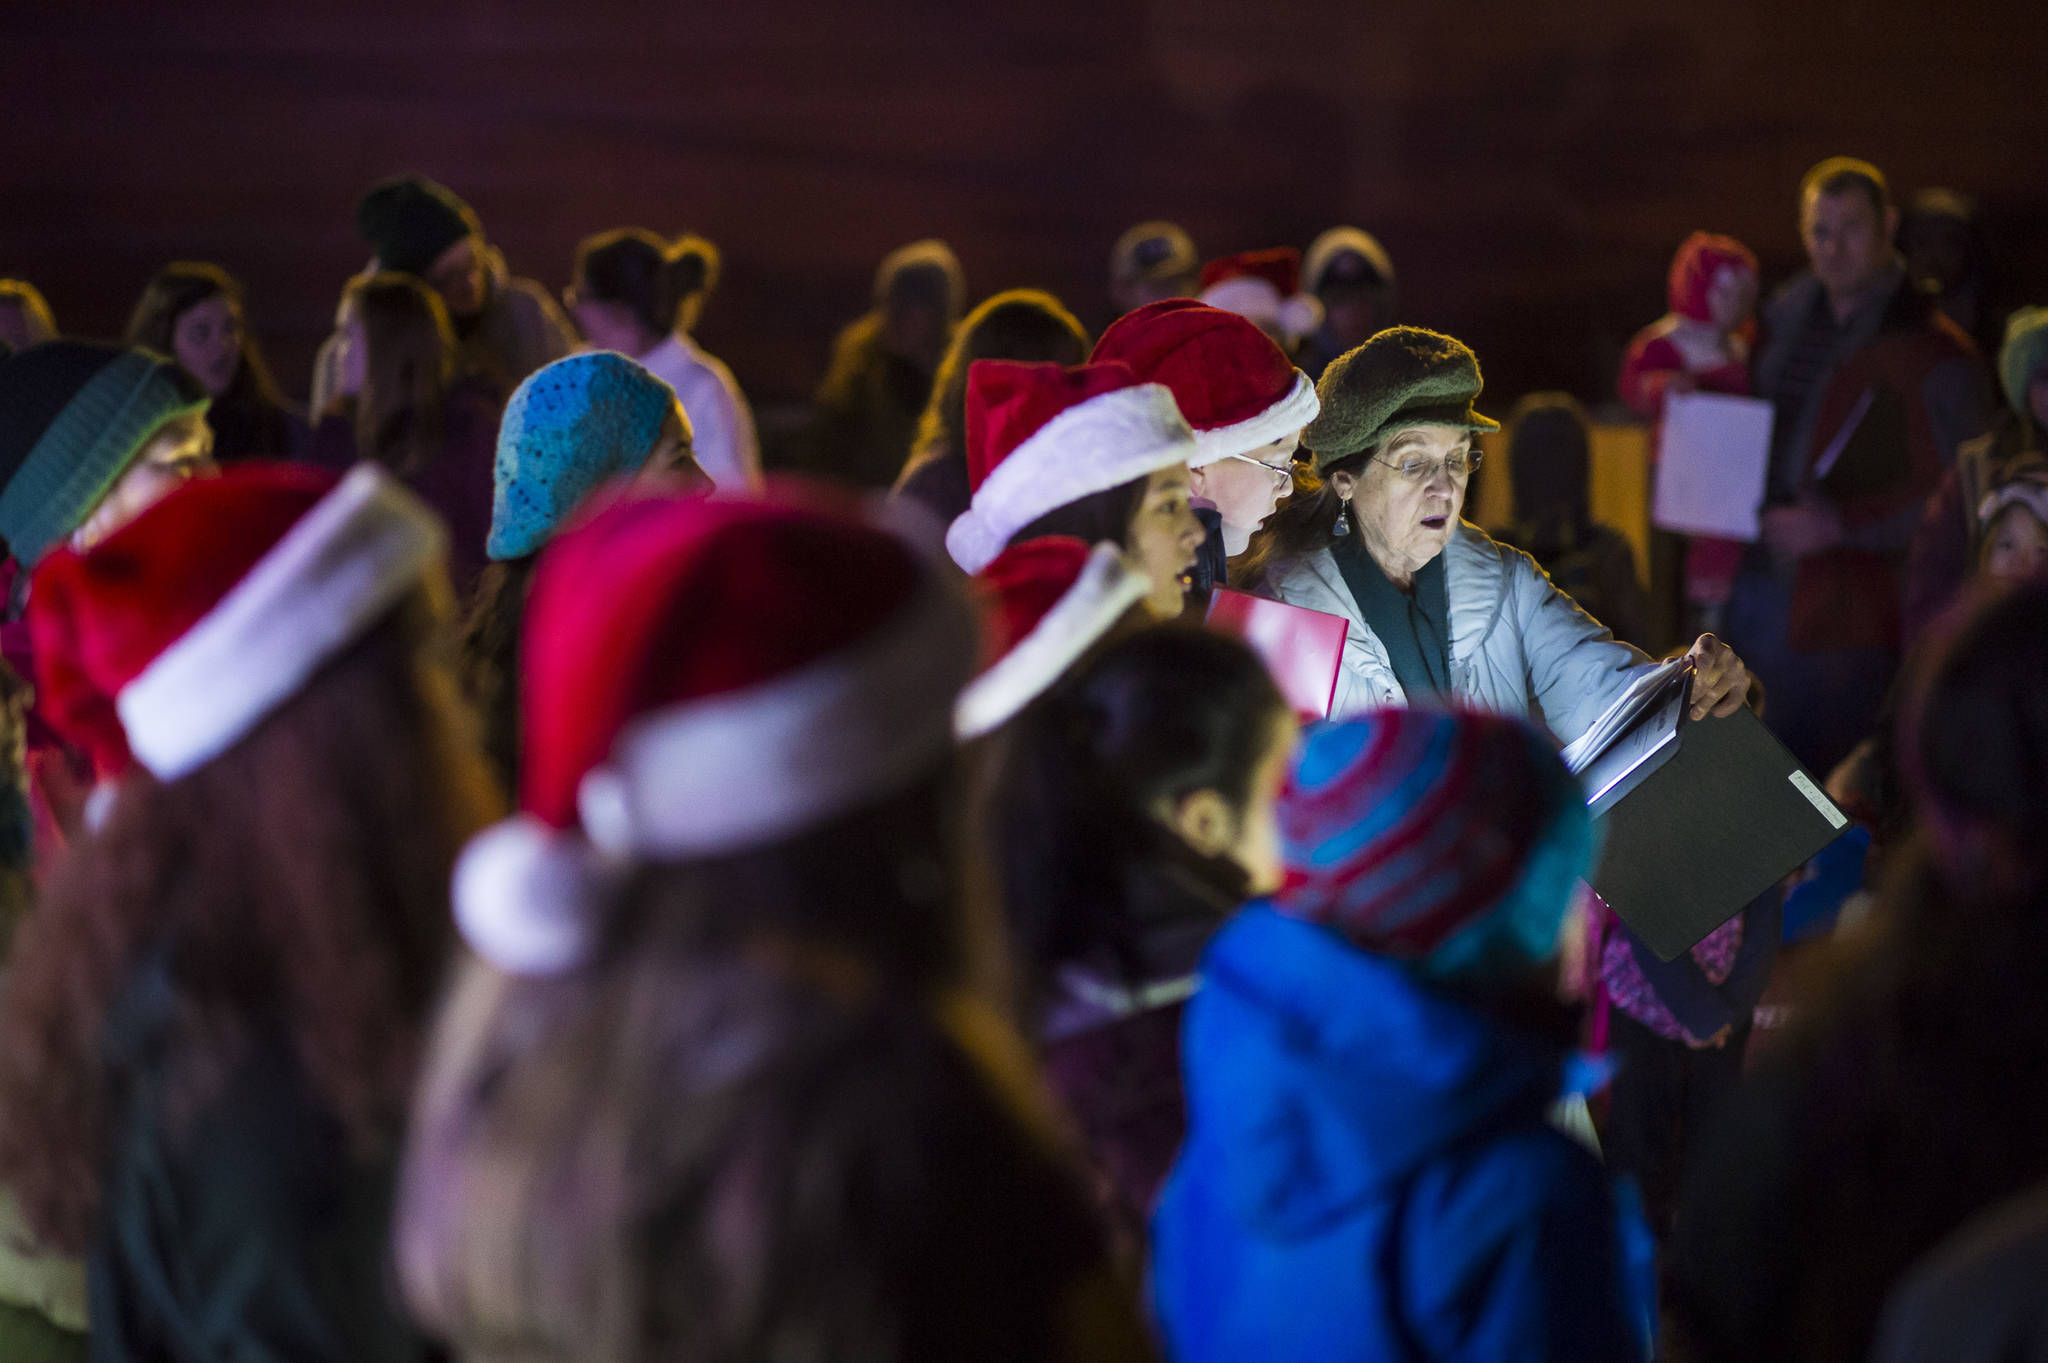 Members of The Voices of Alaska, directed by Missouri Smyth, sing Christmas carols at the annual Douglas Christmas Tree lighting at the Douglas Community United Methodist Church on Friday, Nov. 23, 2018. (Michael Penn | Juneau Empire)